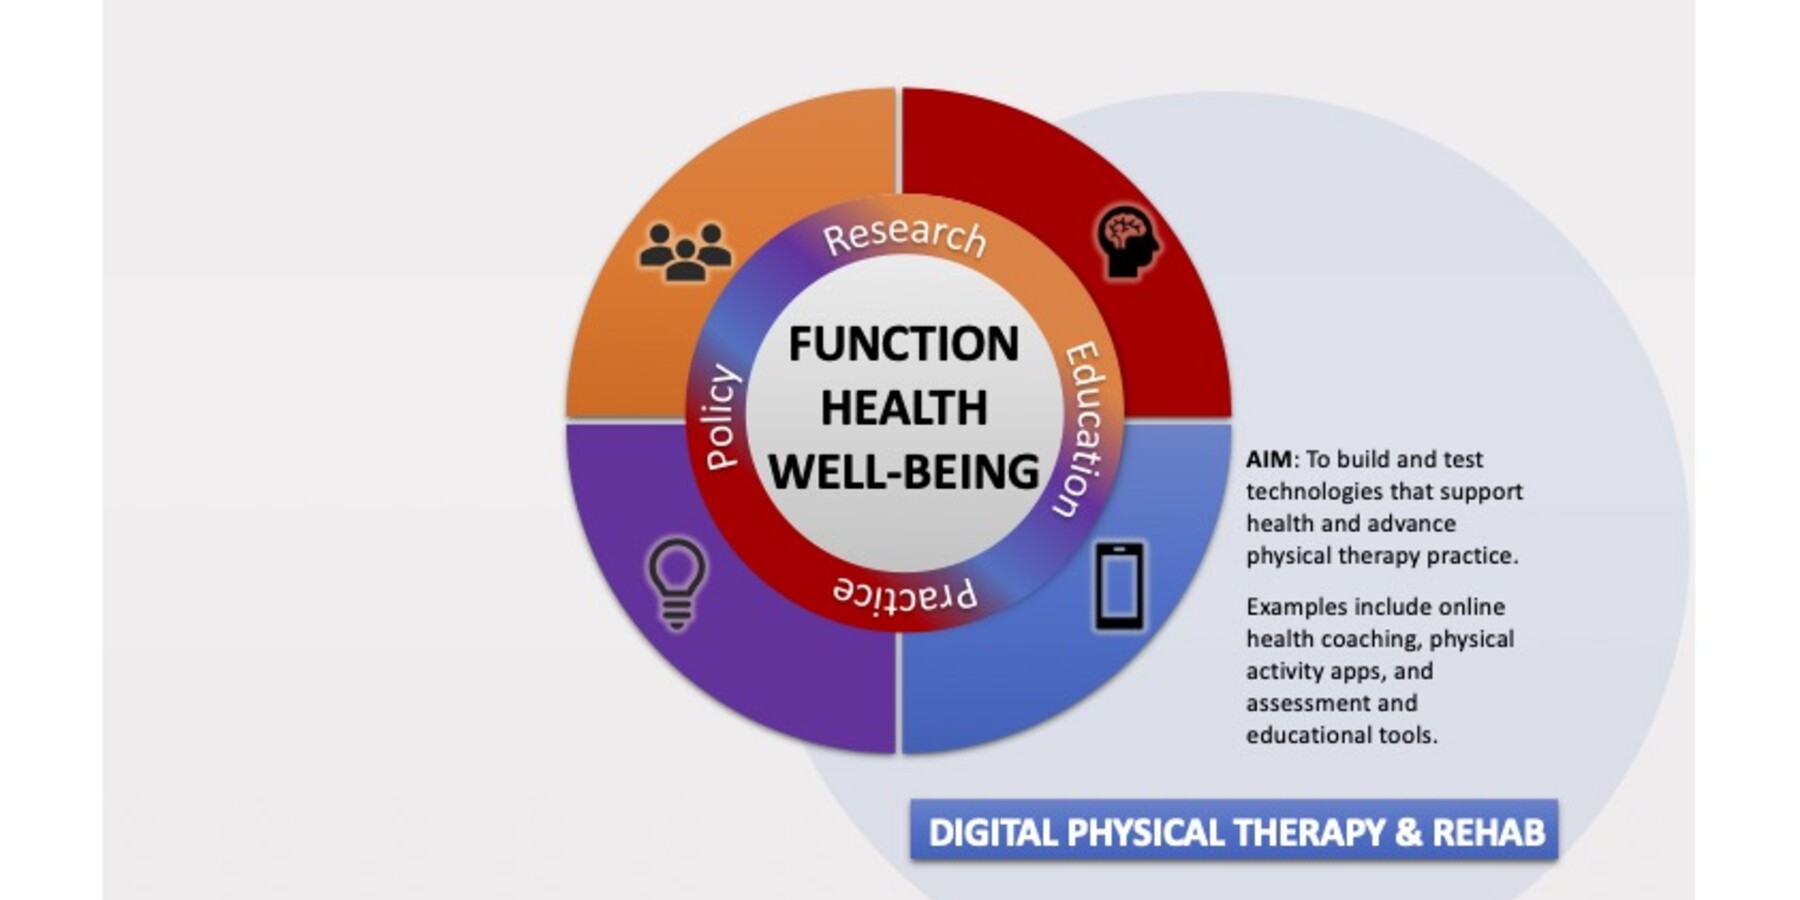 Graphic describing the aim of the Digital Physical Therapy & Rehab research platform